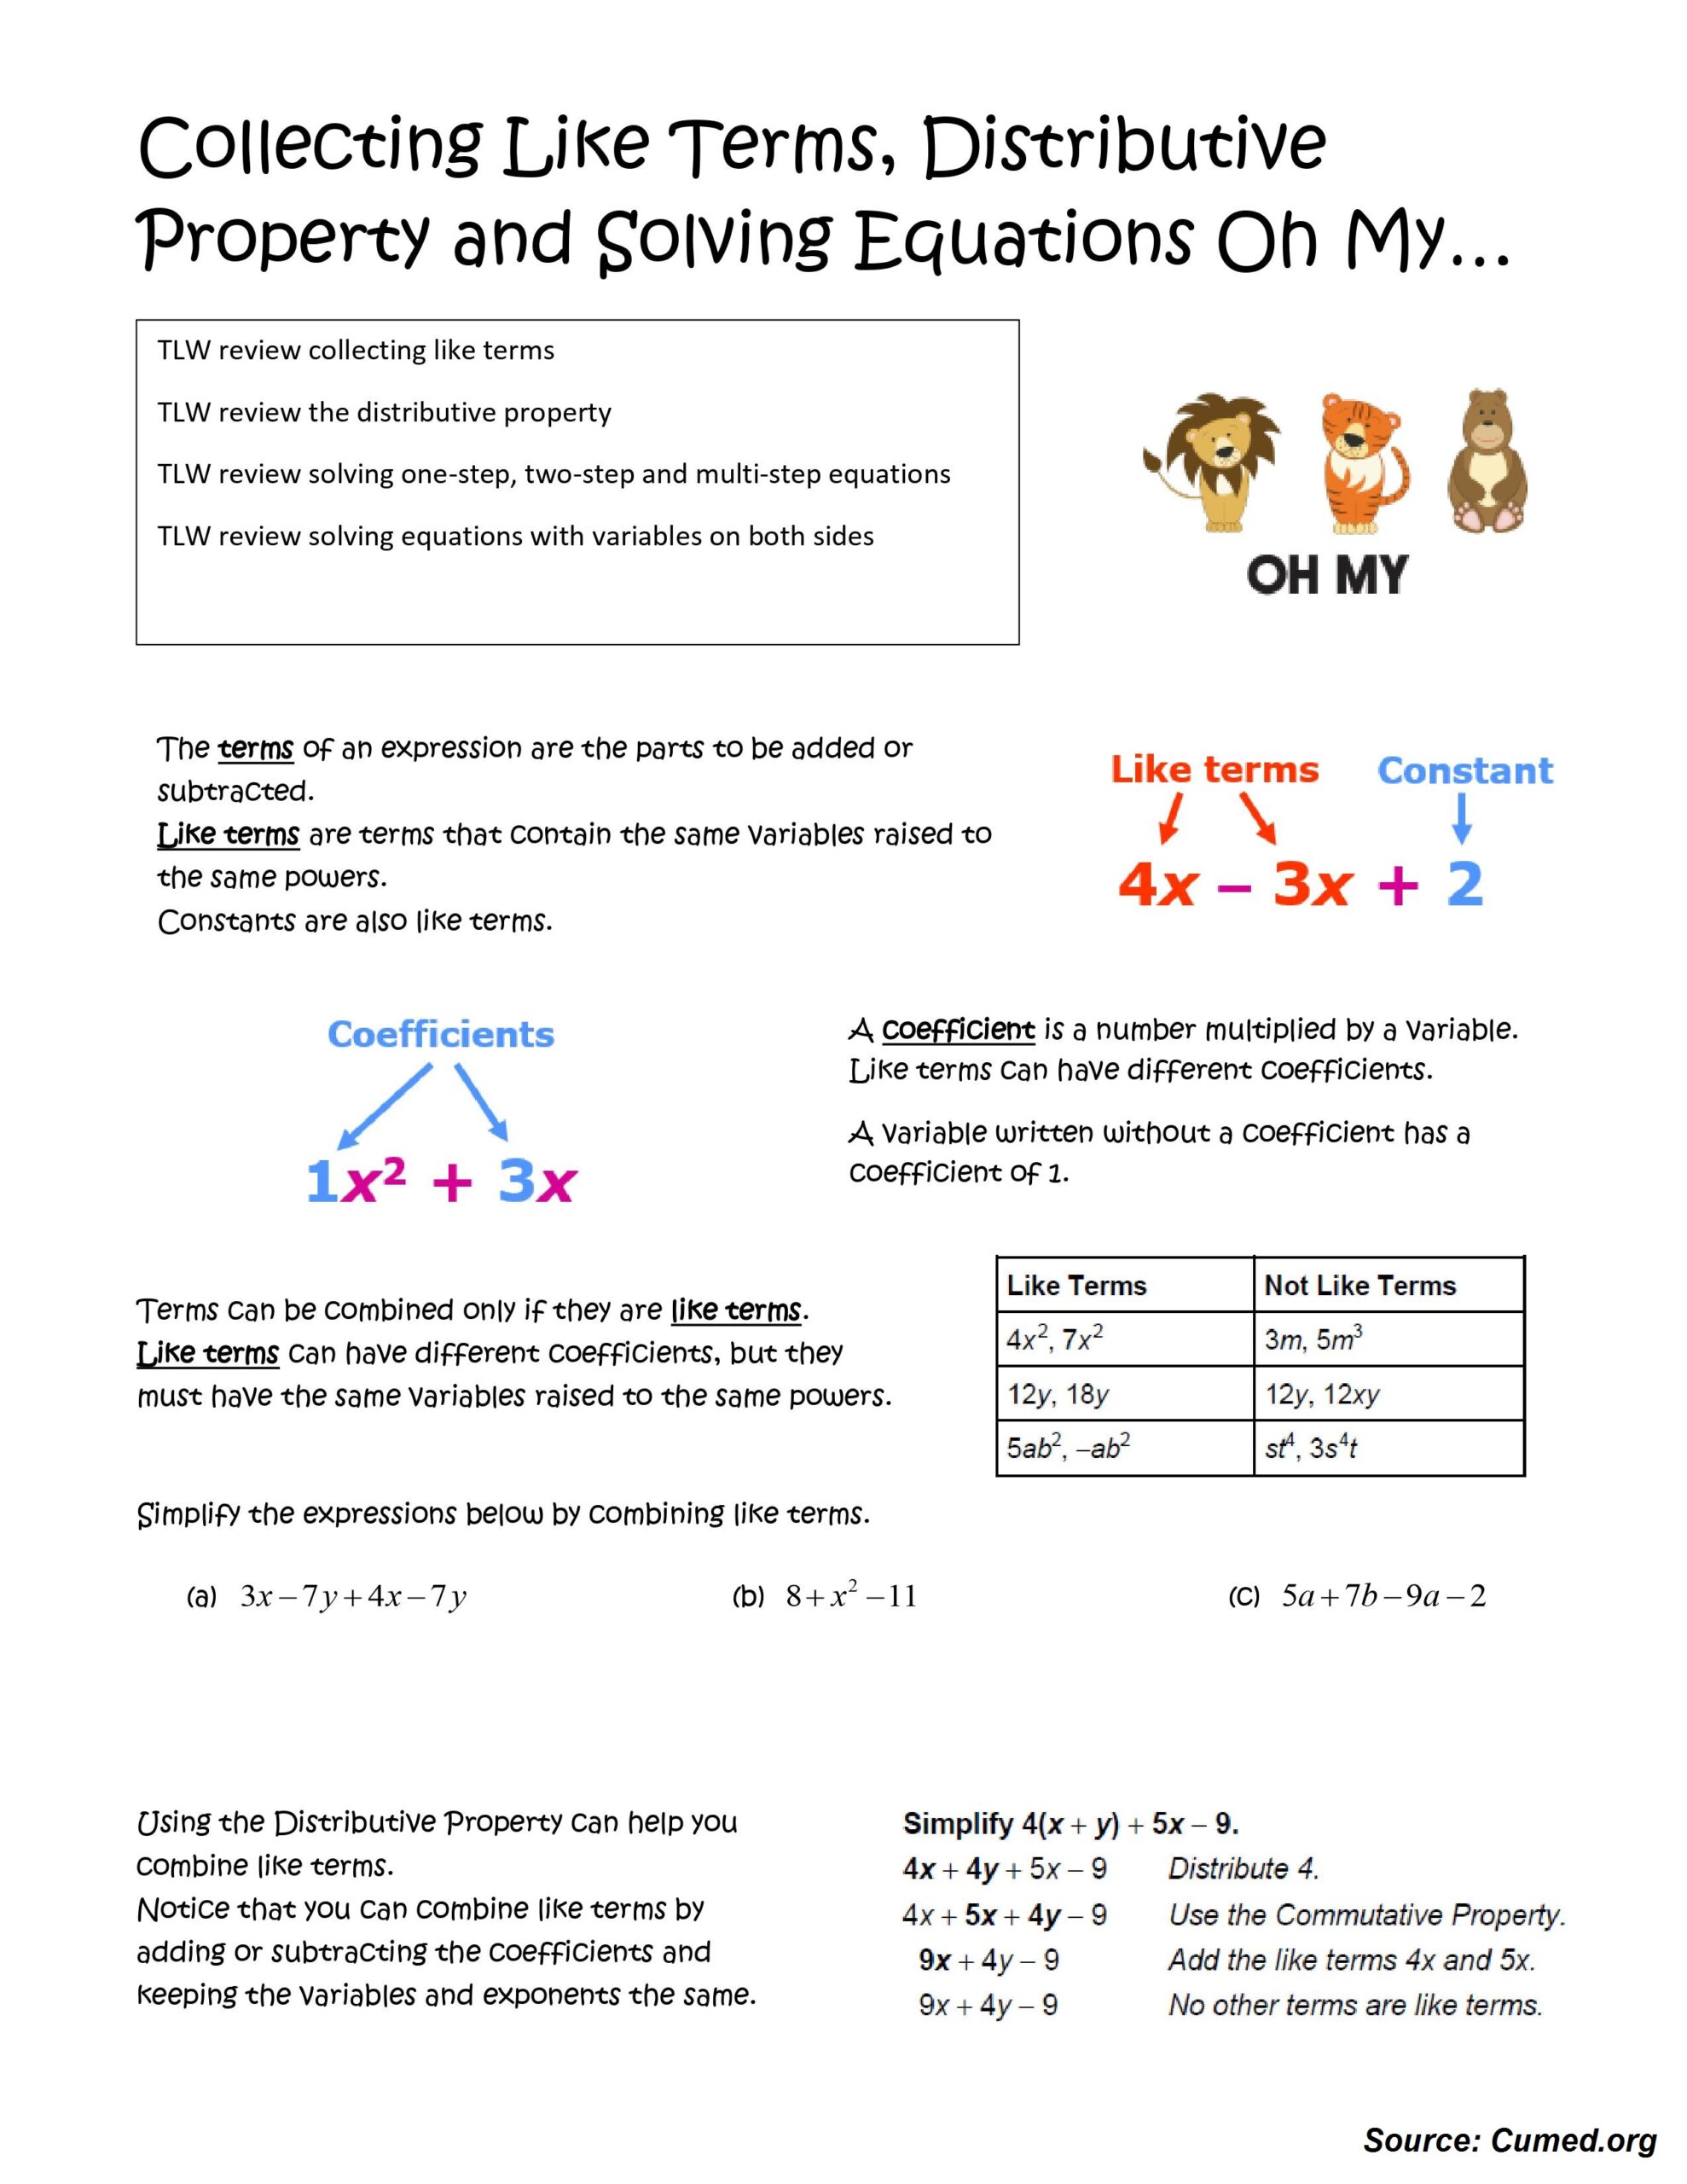 Collecting Like Terms Distributive Property Solving Equations 